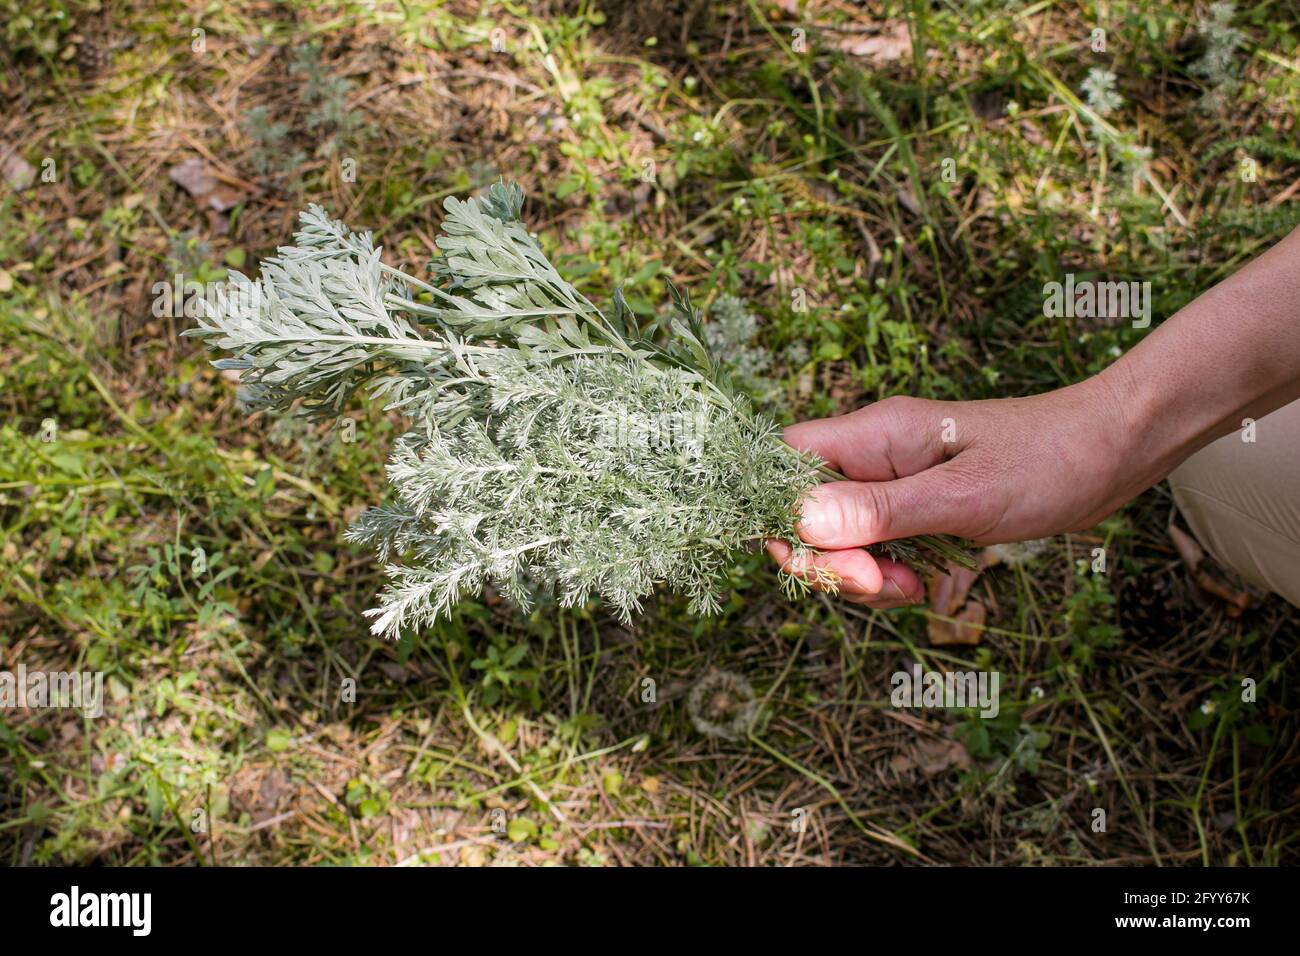 Female hands hold branches with wormwood leaves. Artemisia absinthium, absinthe wormwood is a natural hygiene product. Stock Photo